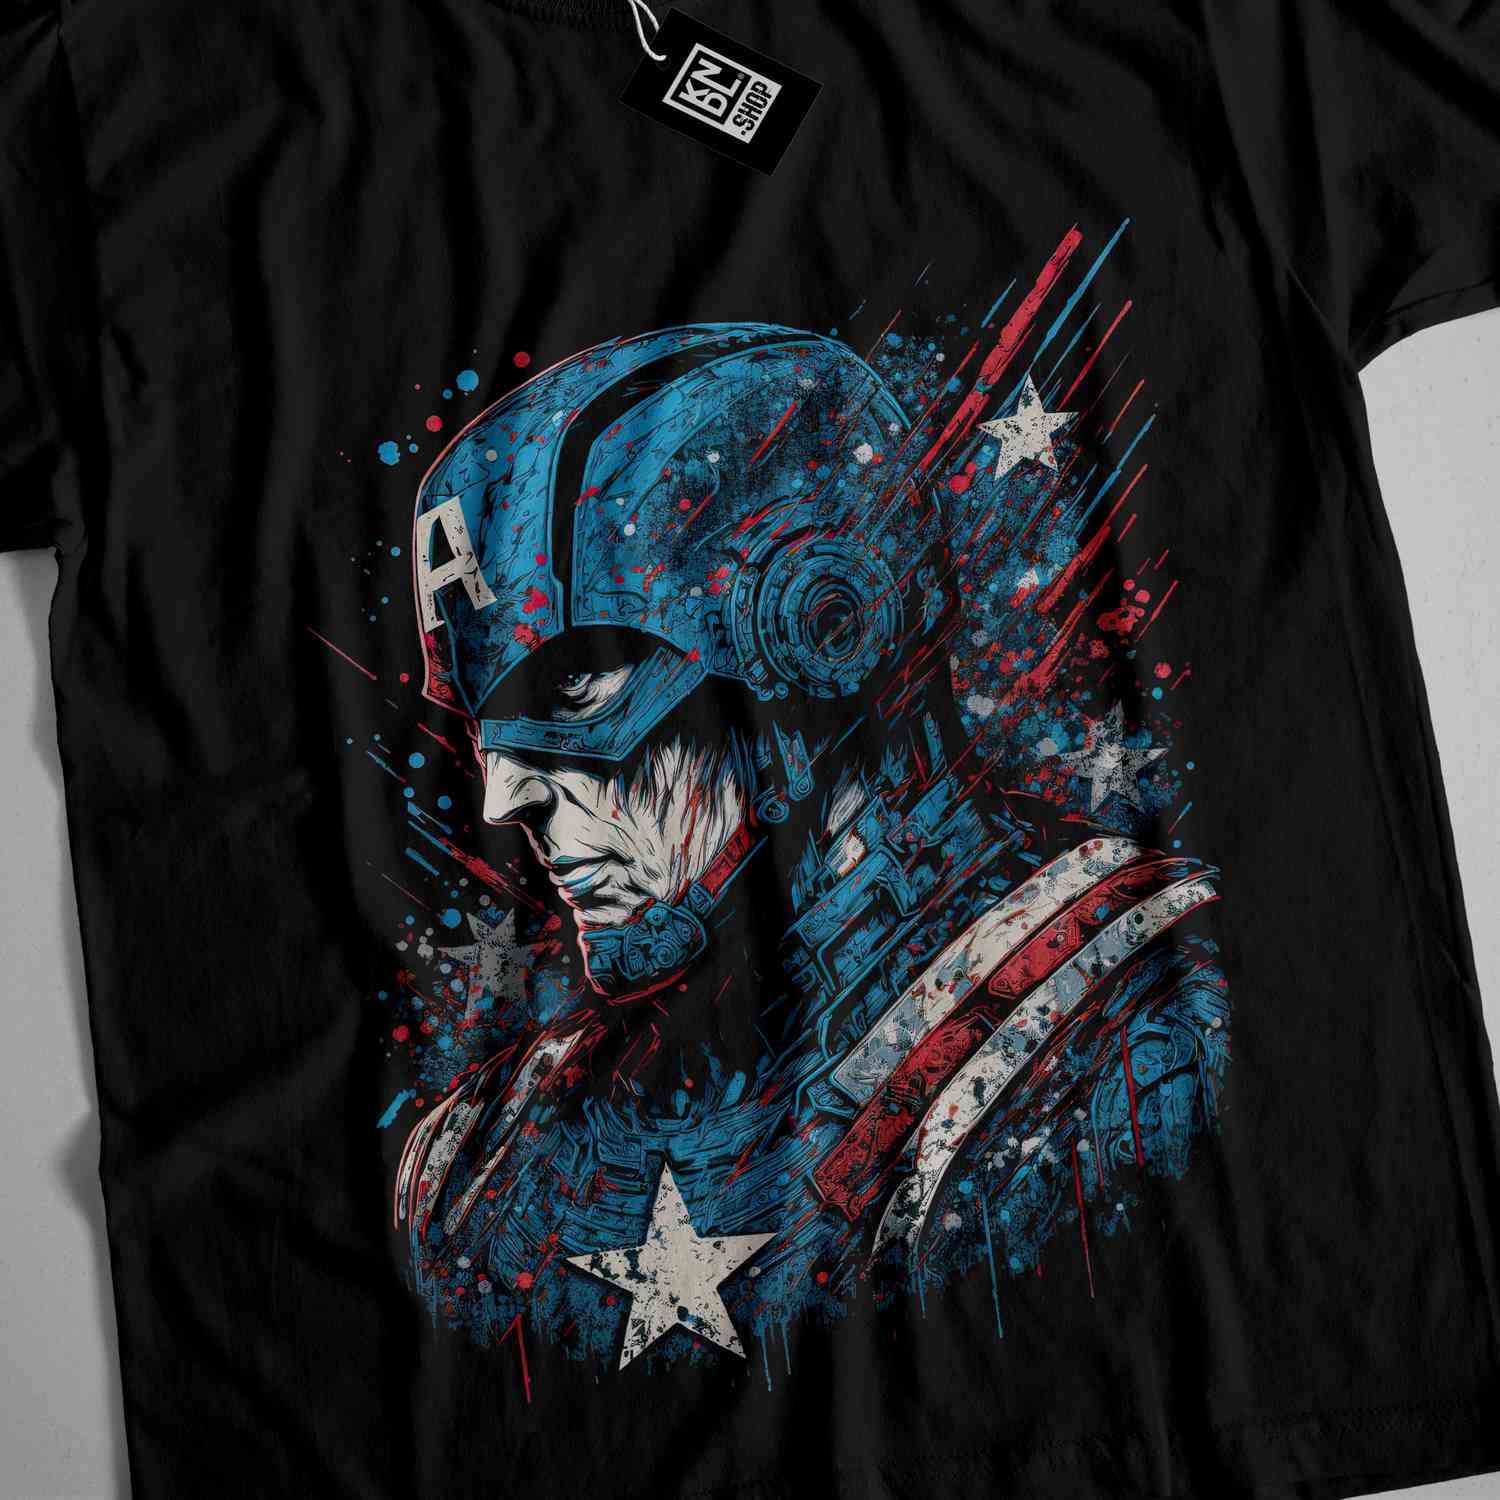 a t - shirt with a captain america design on it